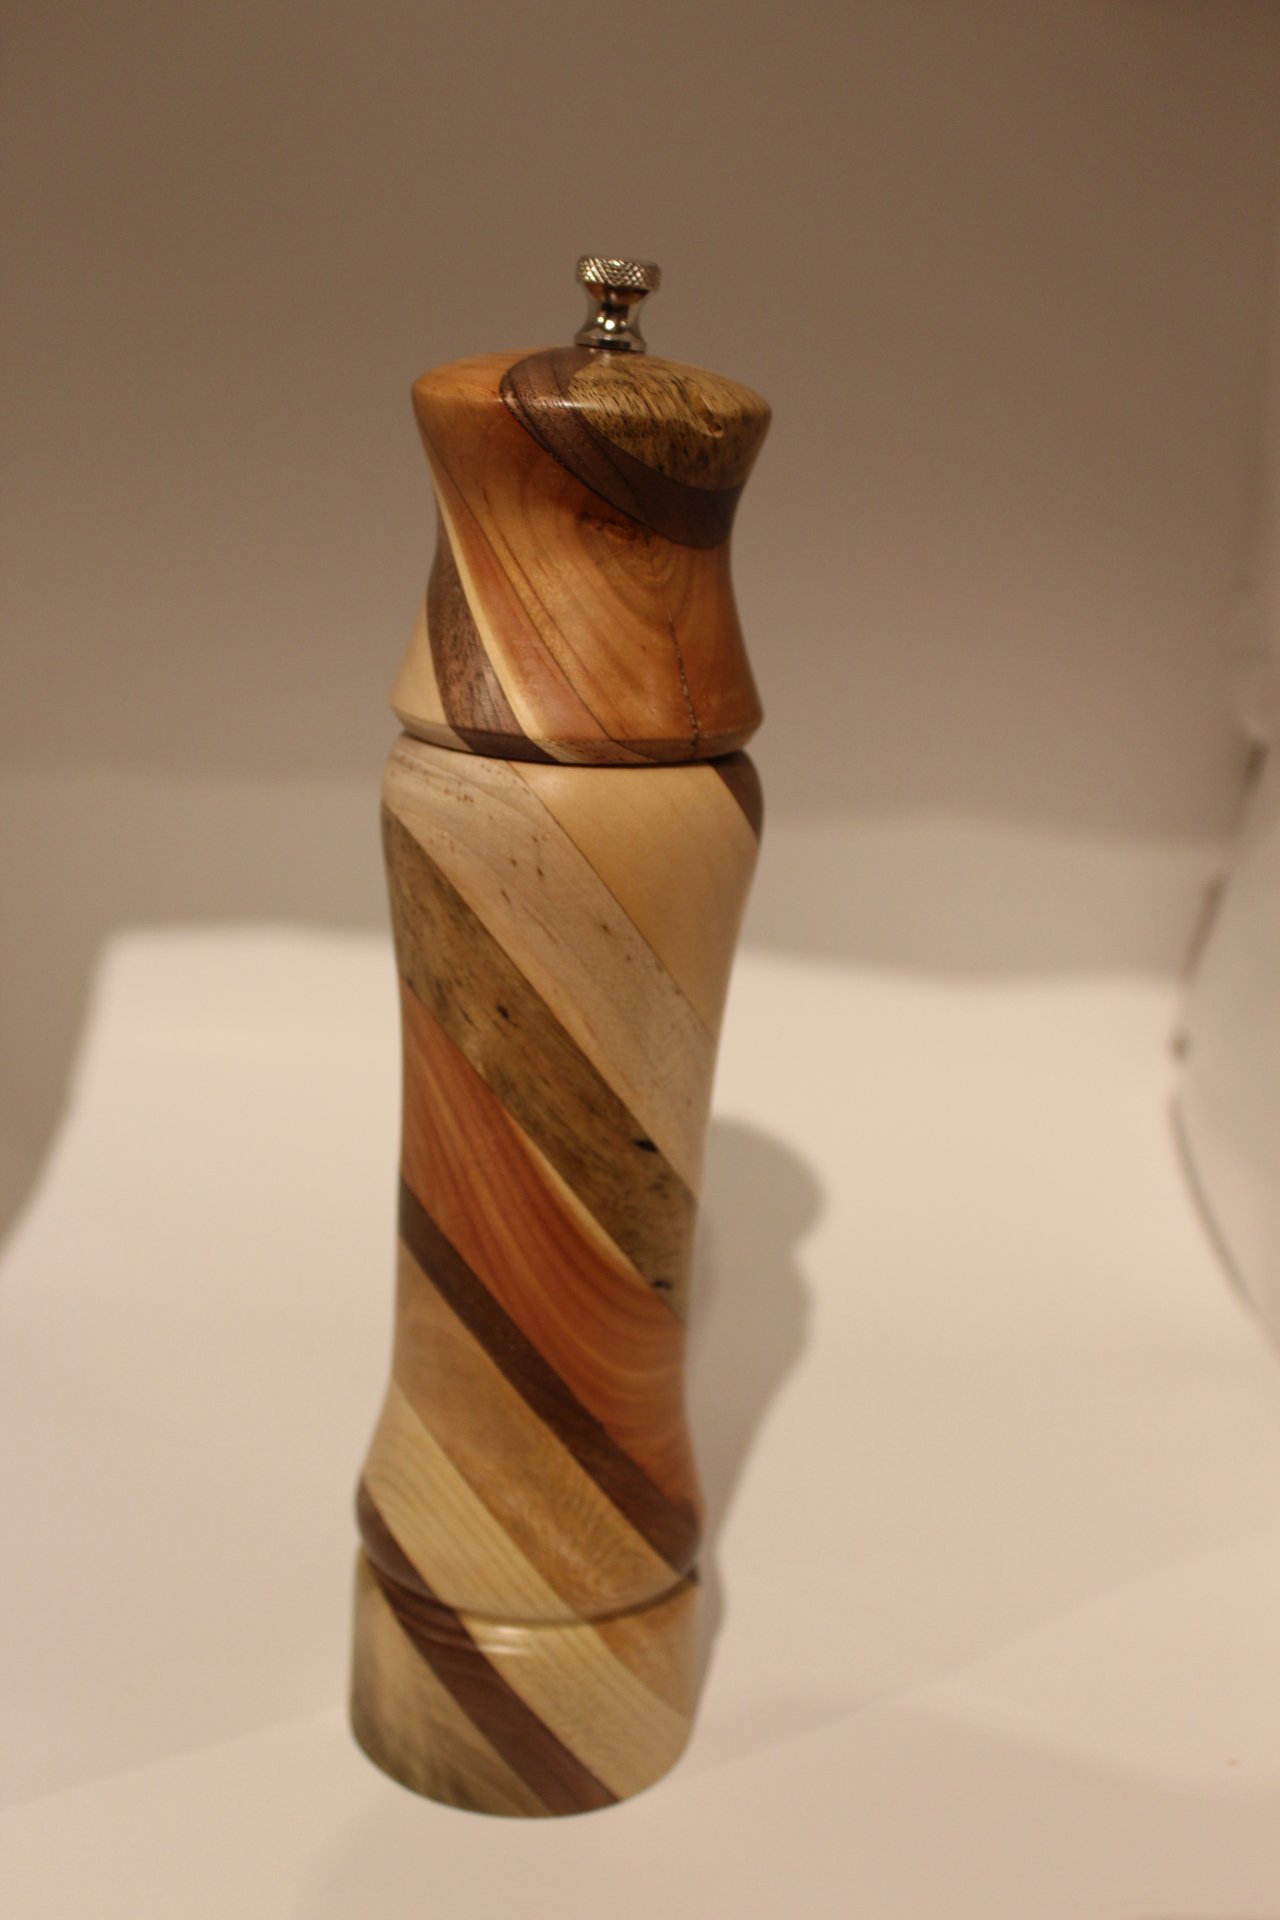 Laminated Pepper Mill